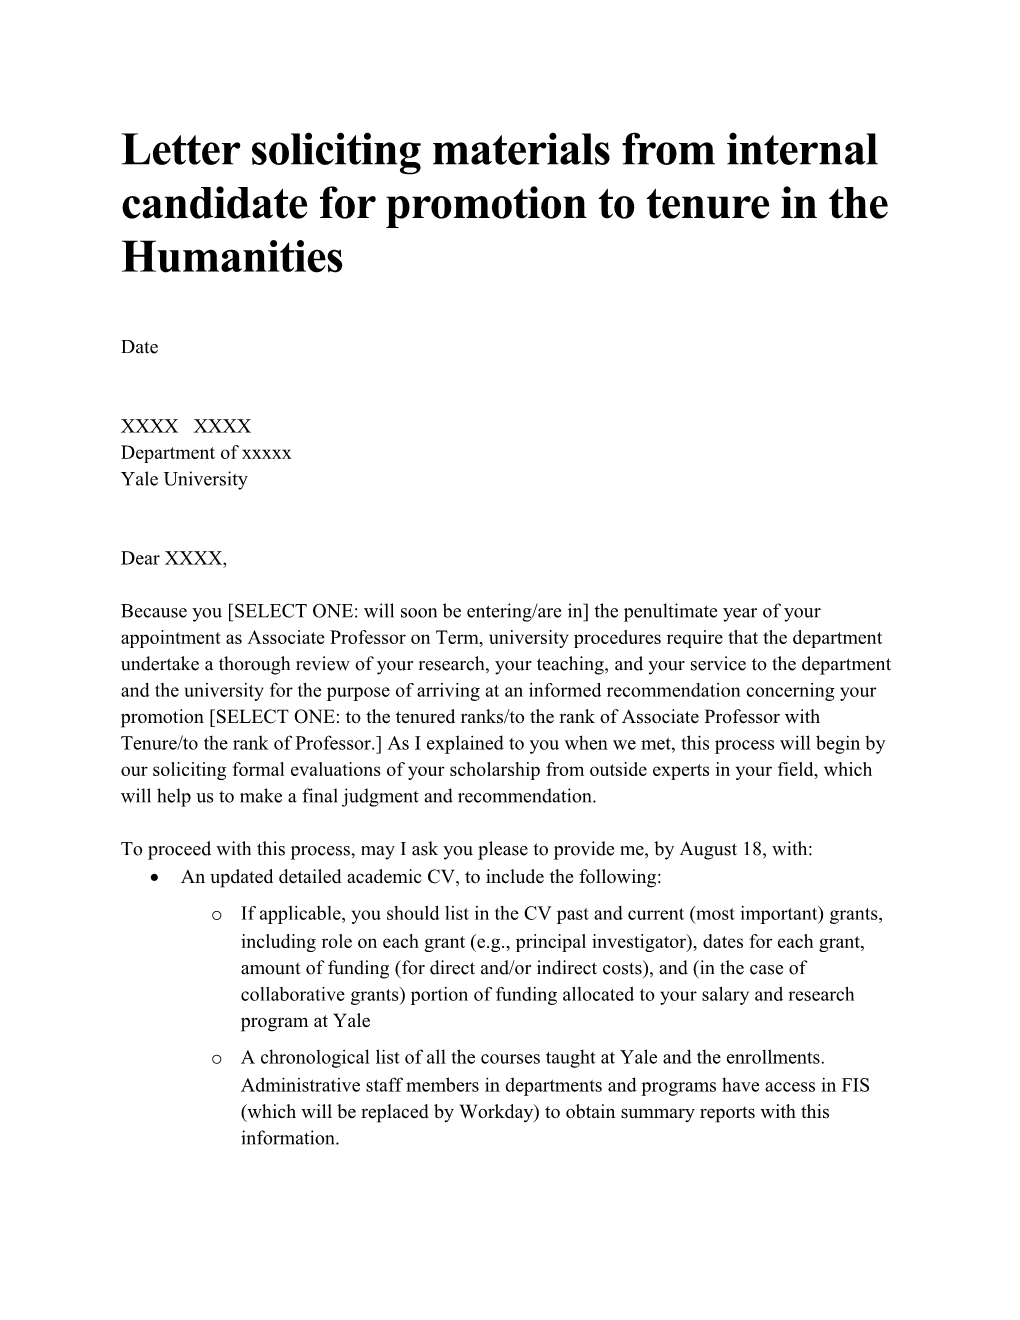 Letter Soliciting Materials from Internal Candidate for Promotion to Tenure in the Humanities